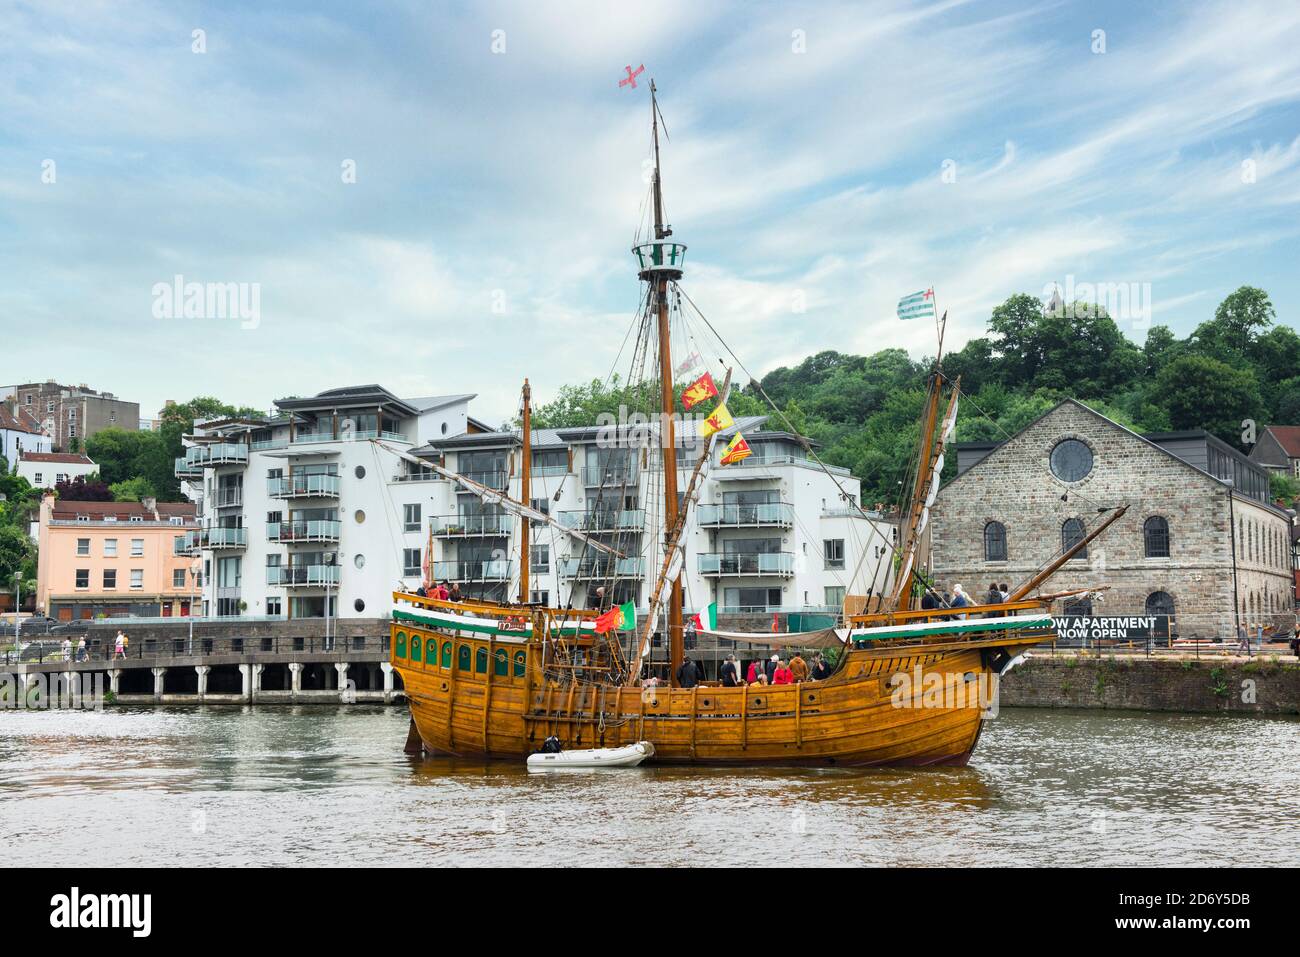 The Matthew of Bristol, caravel replica of John Cabot sailing ship. Modern reconstruction sailing on the River Avon, carrying a boatload of tourists. Stock Photo